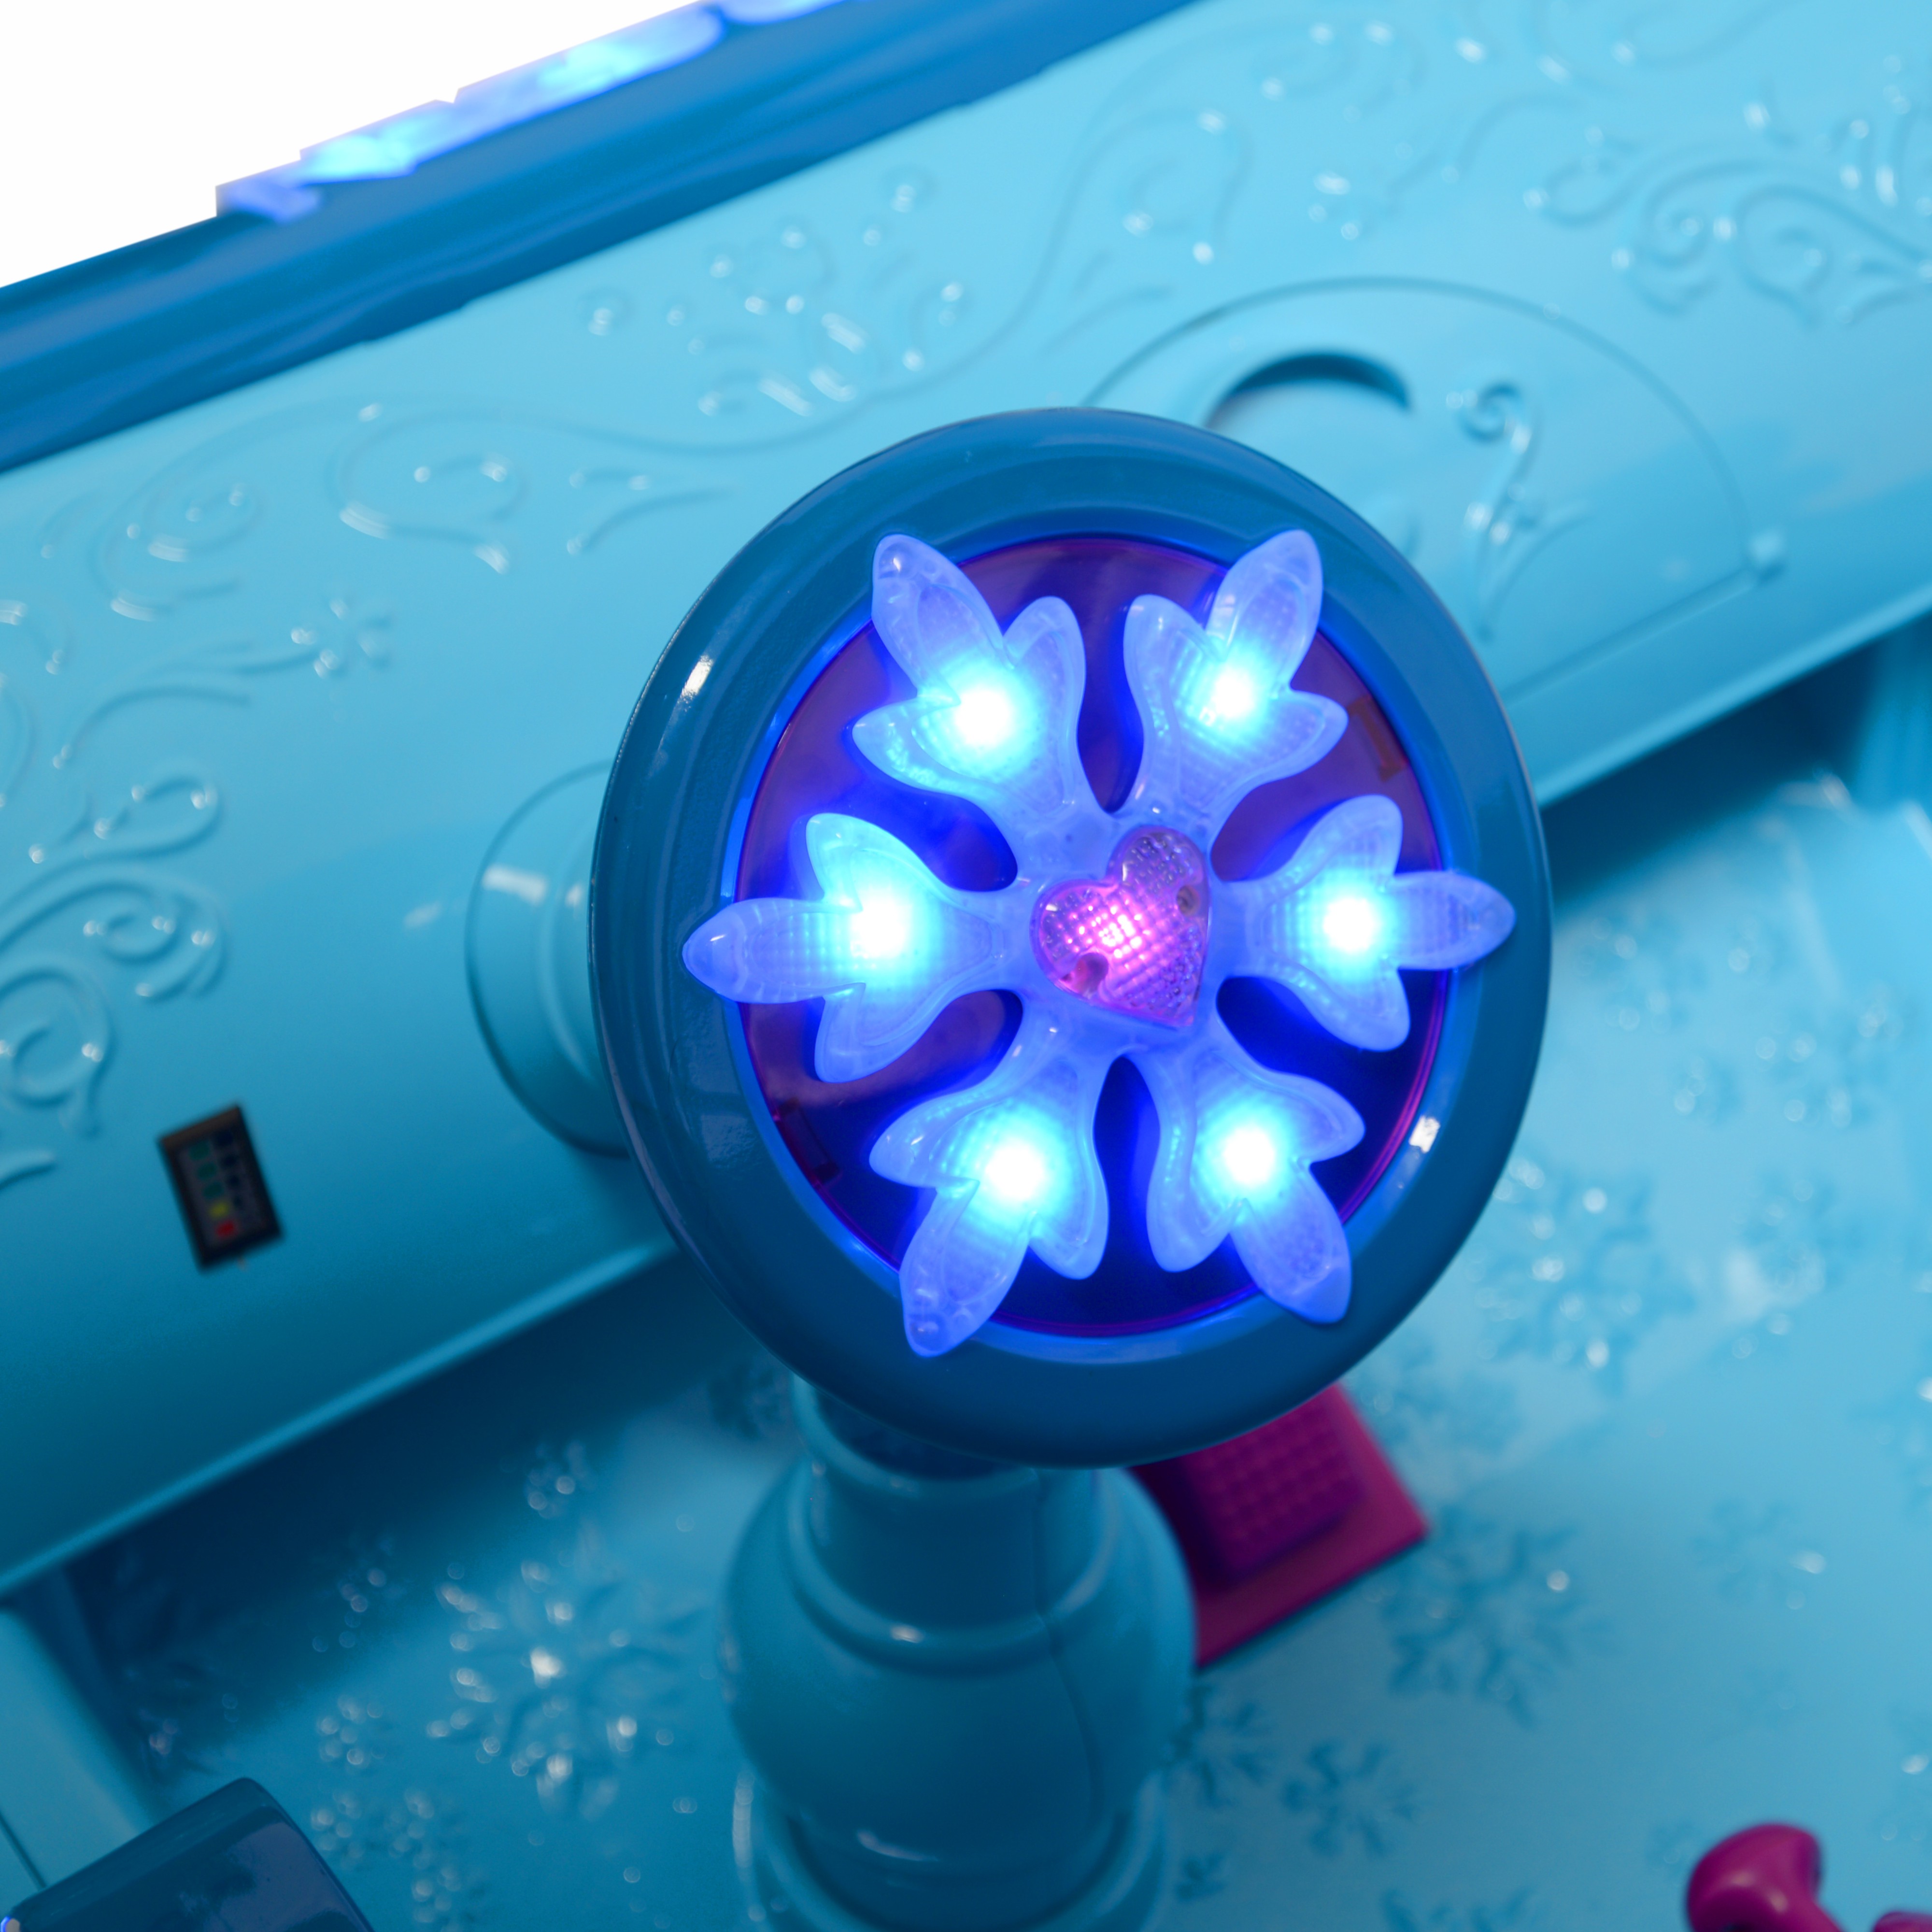 Disney Frozen Sleigh 12-Volt Battery Powered Ride-On for your little Elsa and Anna - Hours of Fun! - image 4 of 6